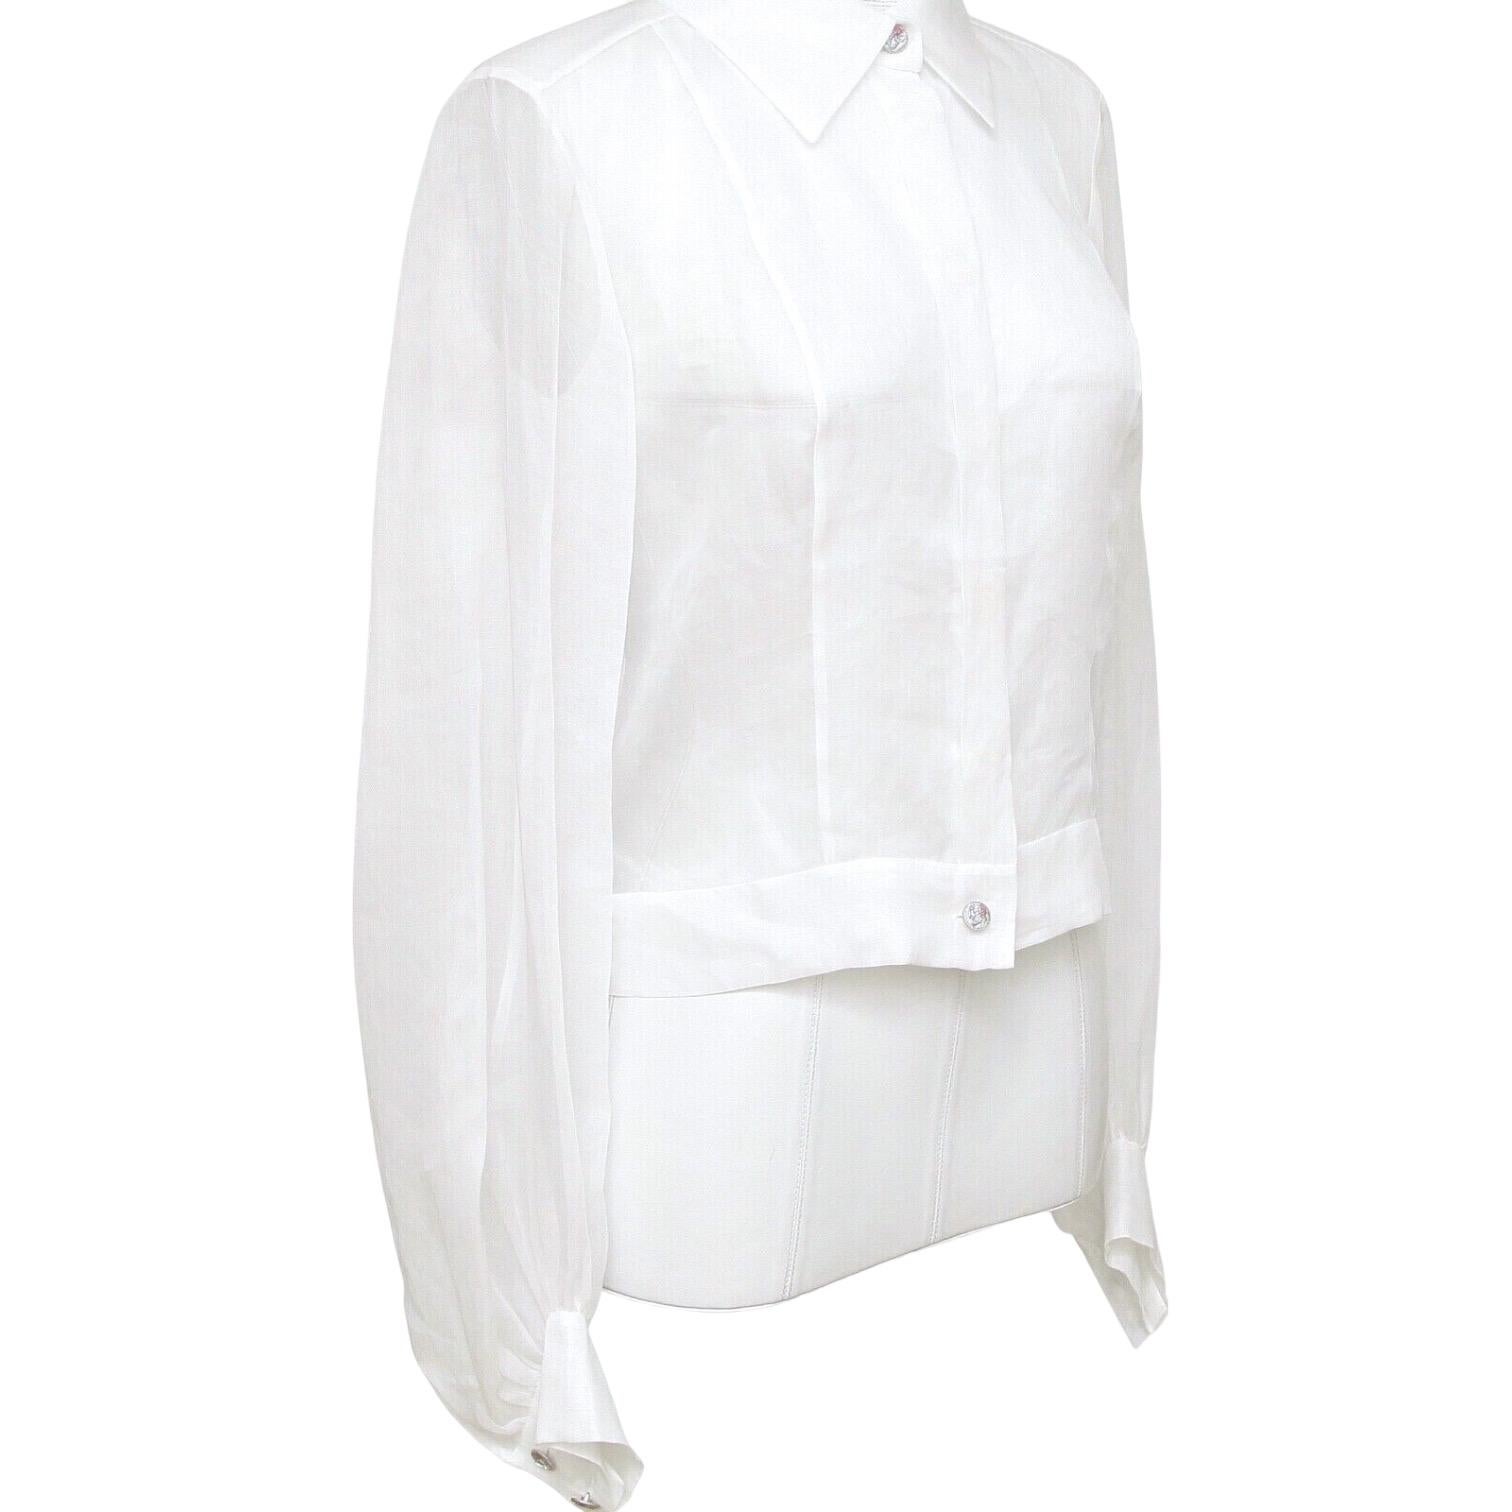 CHANEL White Blouse Top Long Sleeve Cotton 2017 17C $1800 NWT 1